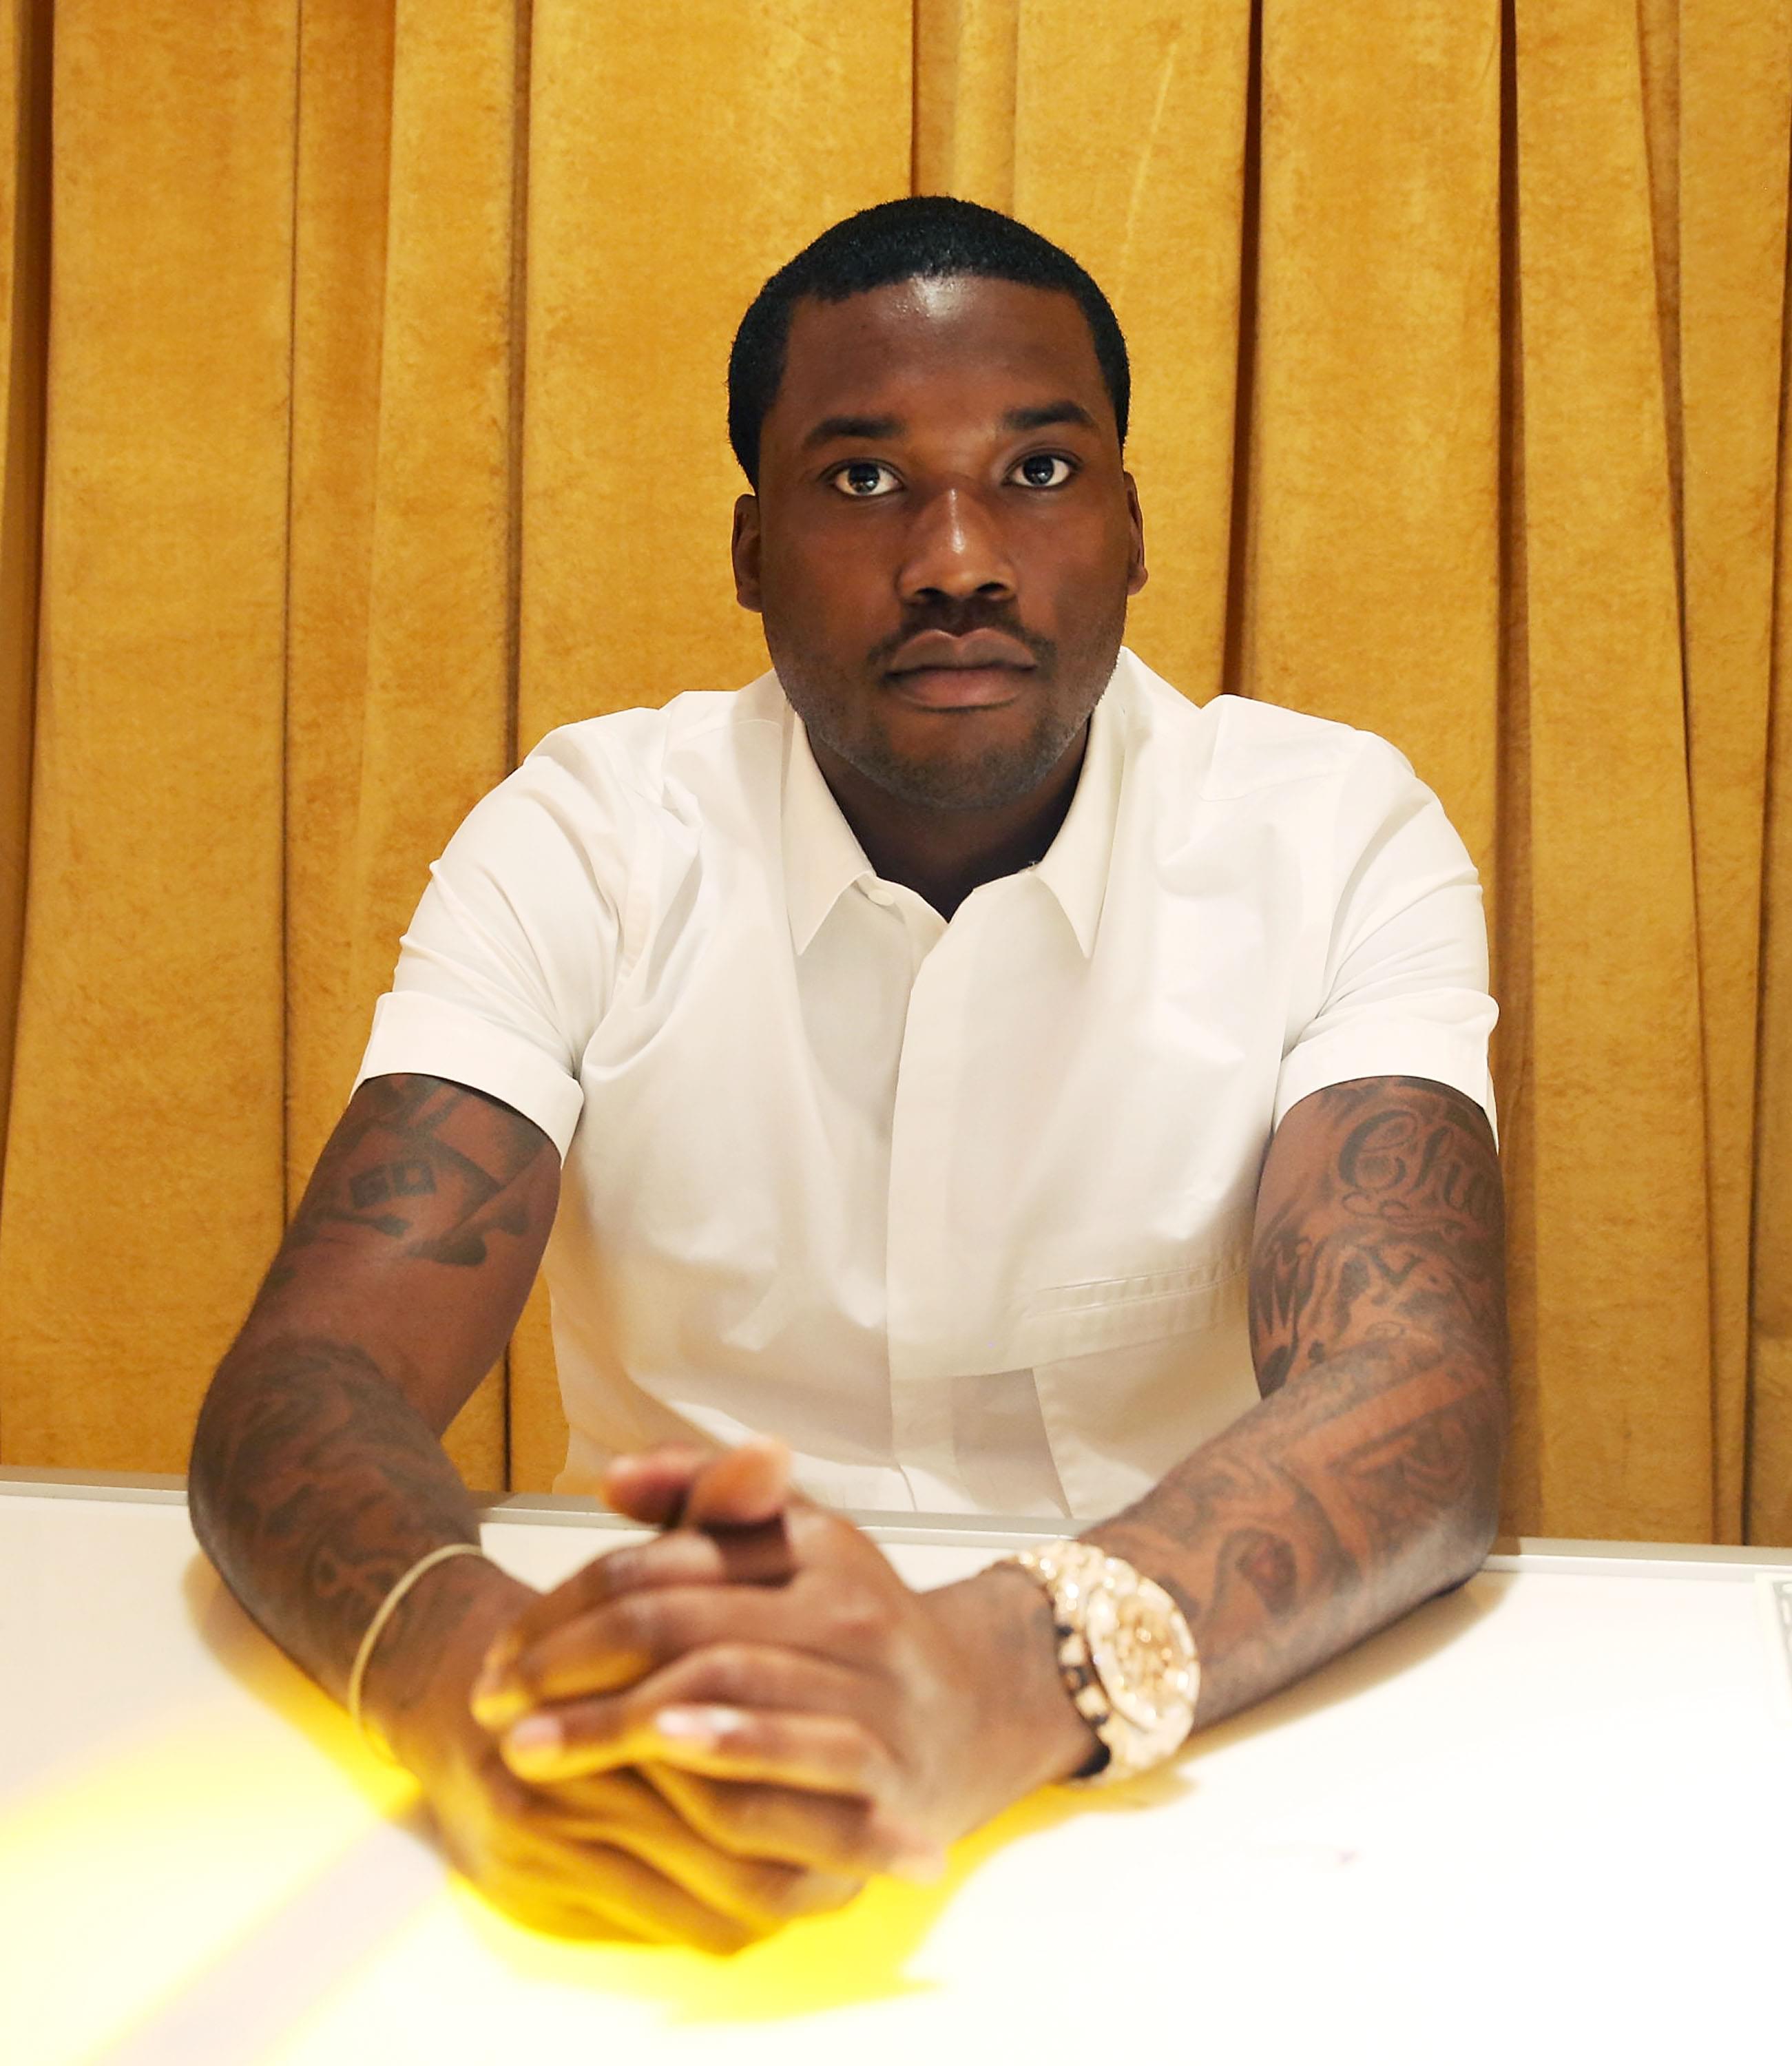 Meek Mill Got Arrested After Going Live on IG [WATCH]